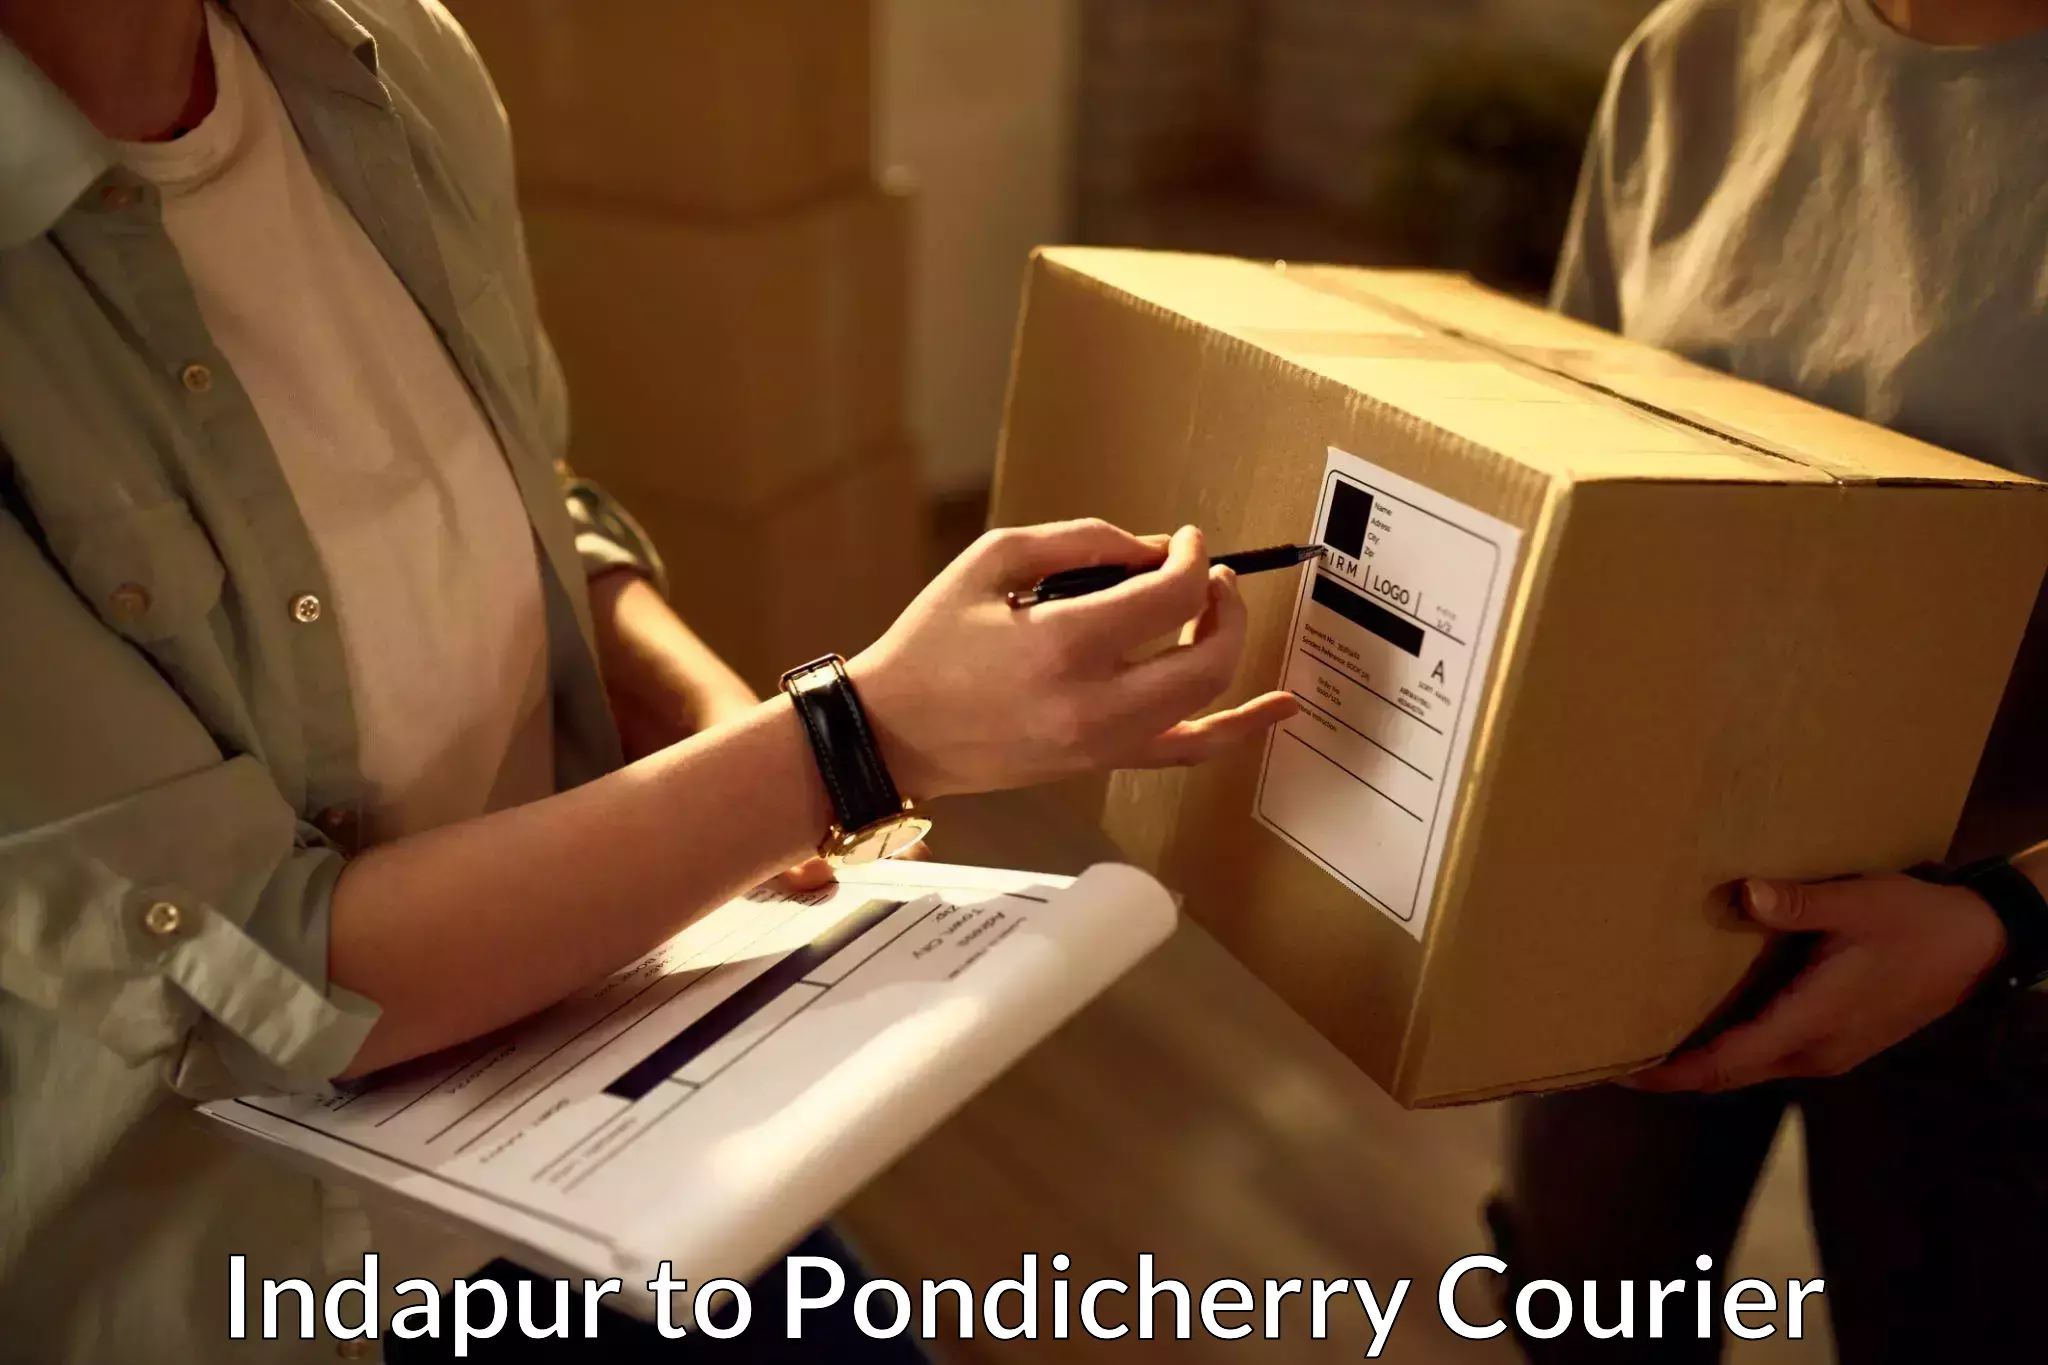 24-hour courier services in Indapur to Pondicherry